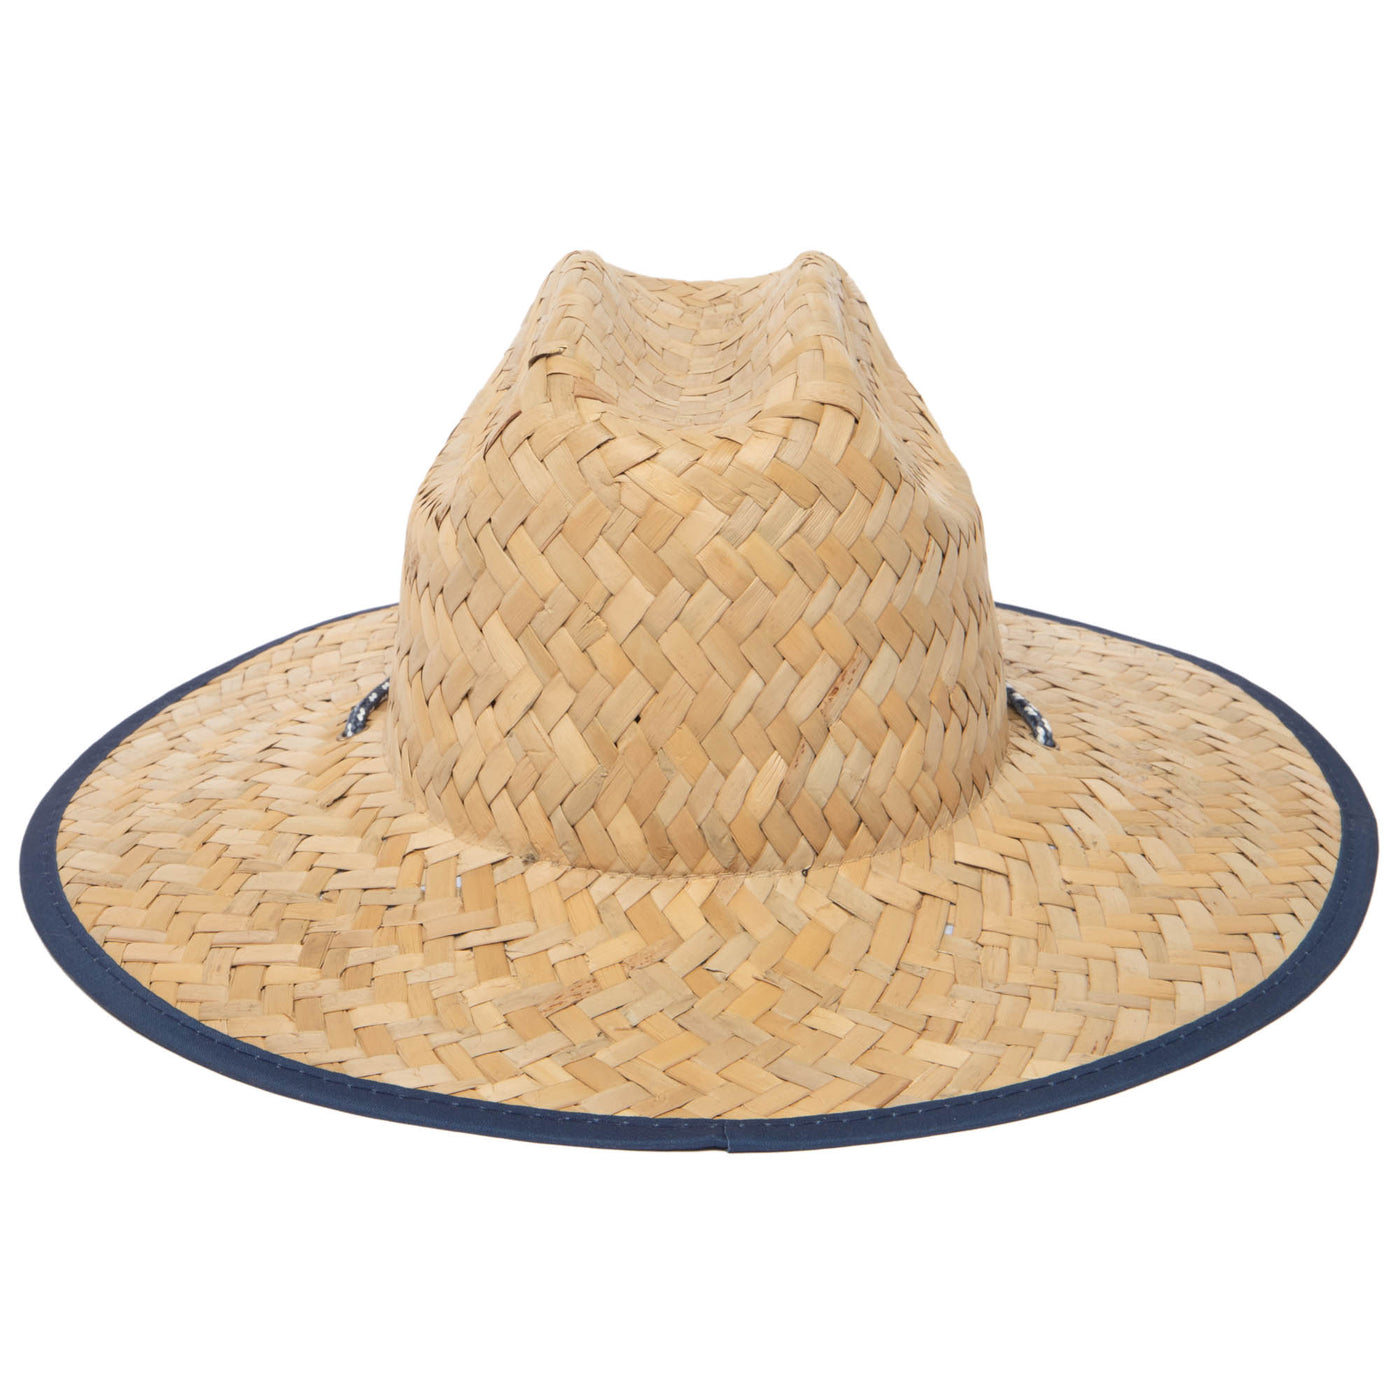 Getaway - Lifeguard Hat with Palm Tree Print by Ocean Pacific-LIFEGUARD-San Diego Hat Company